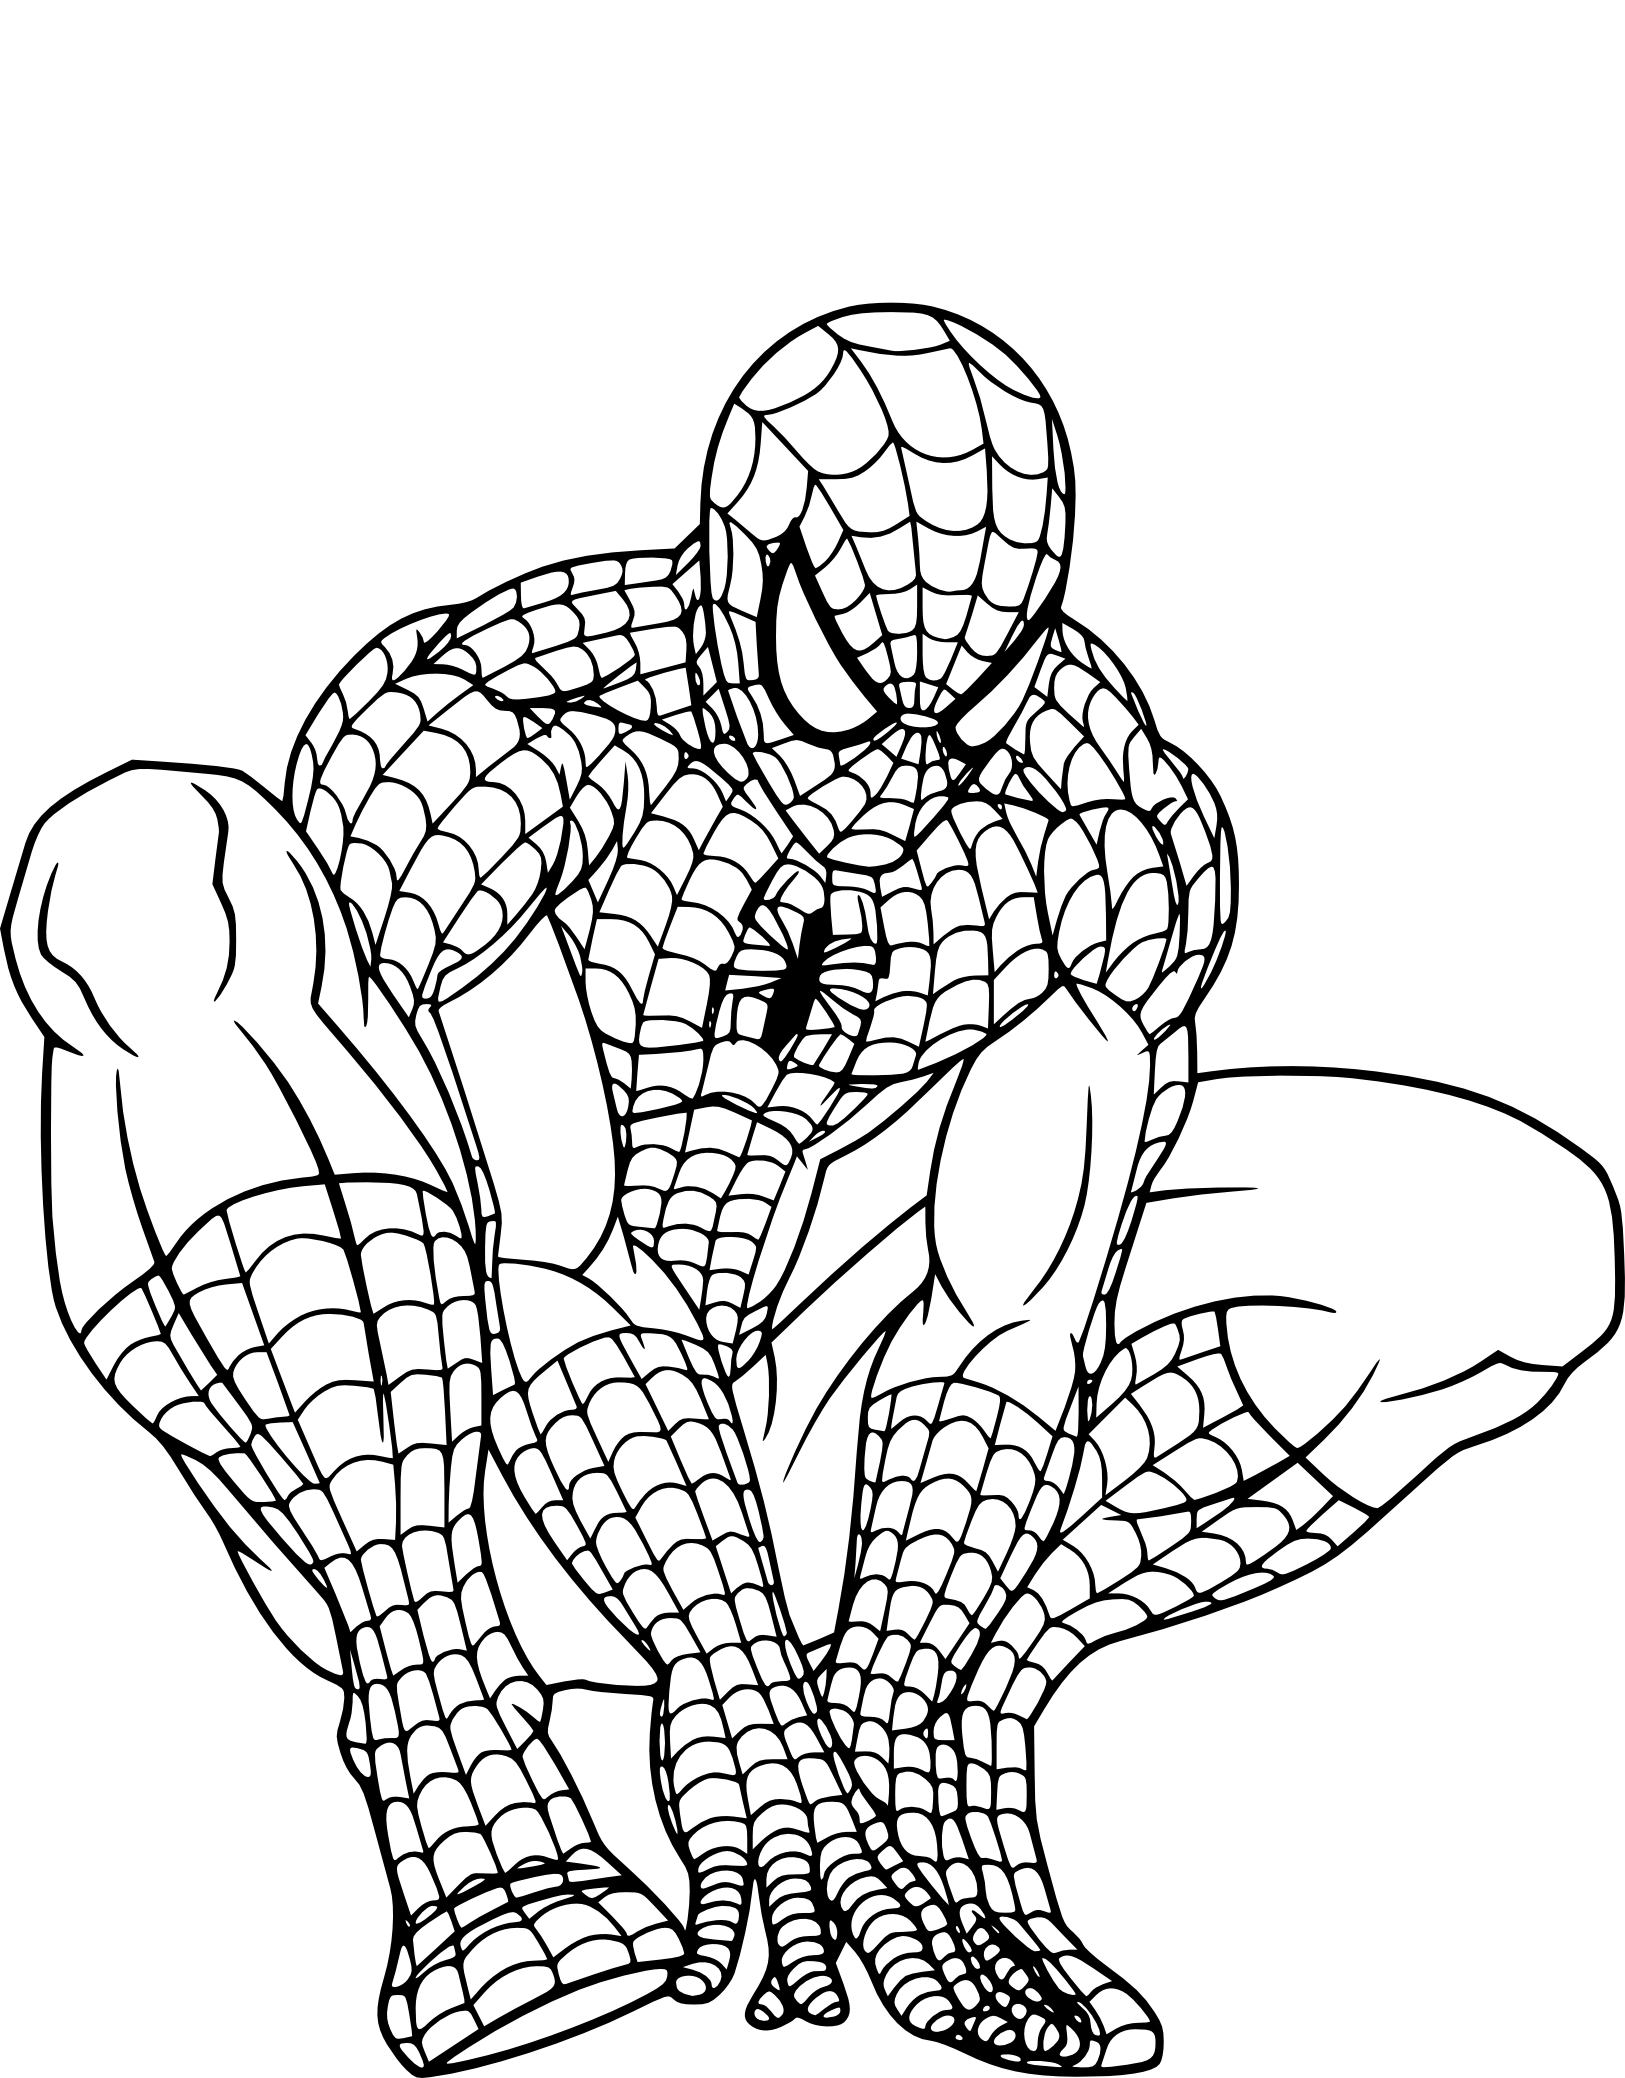 Spiderman drawing and coloring page